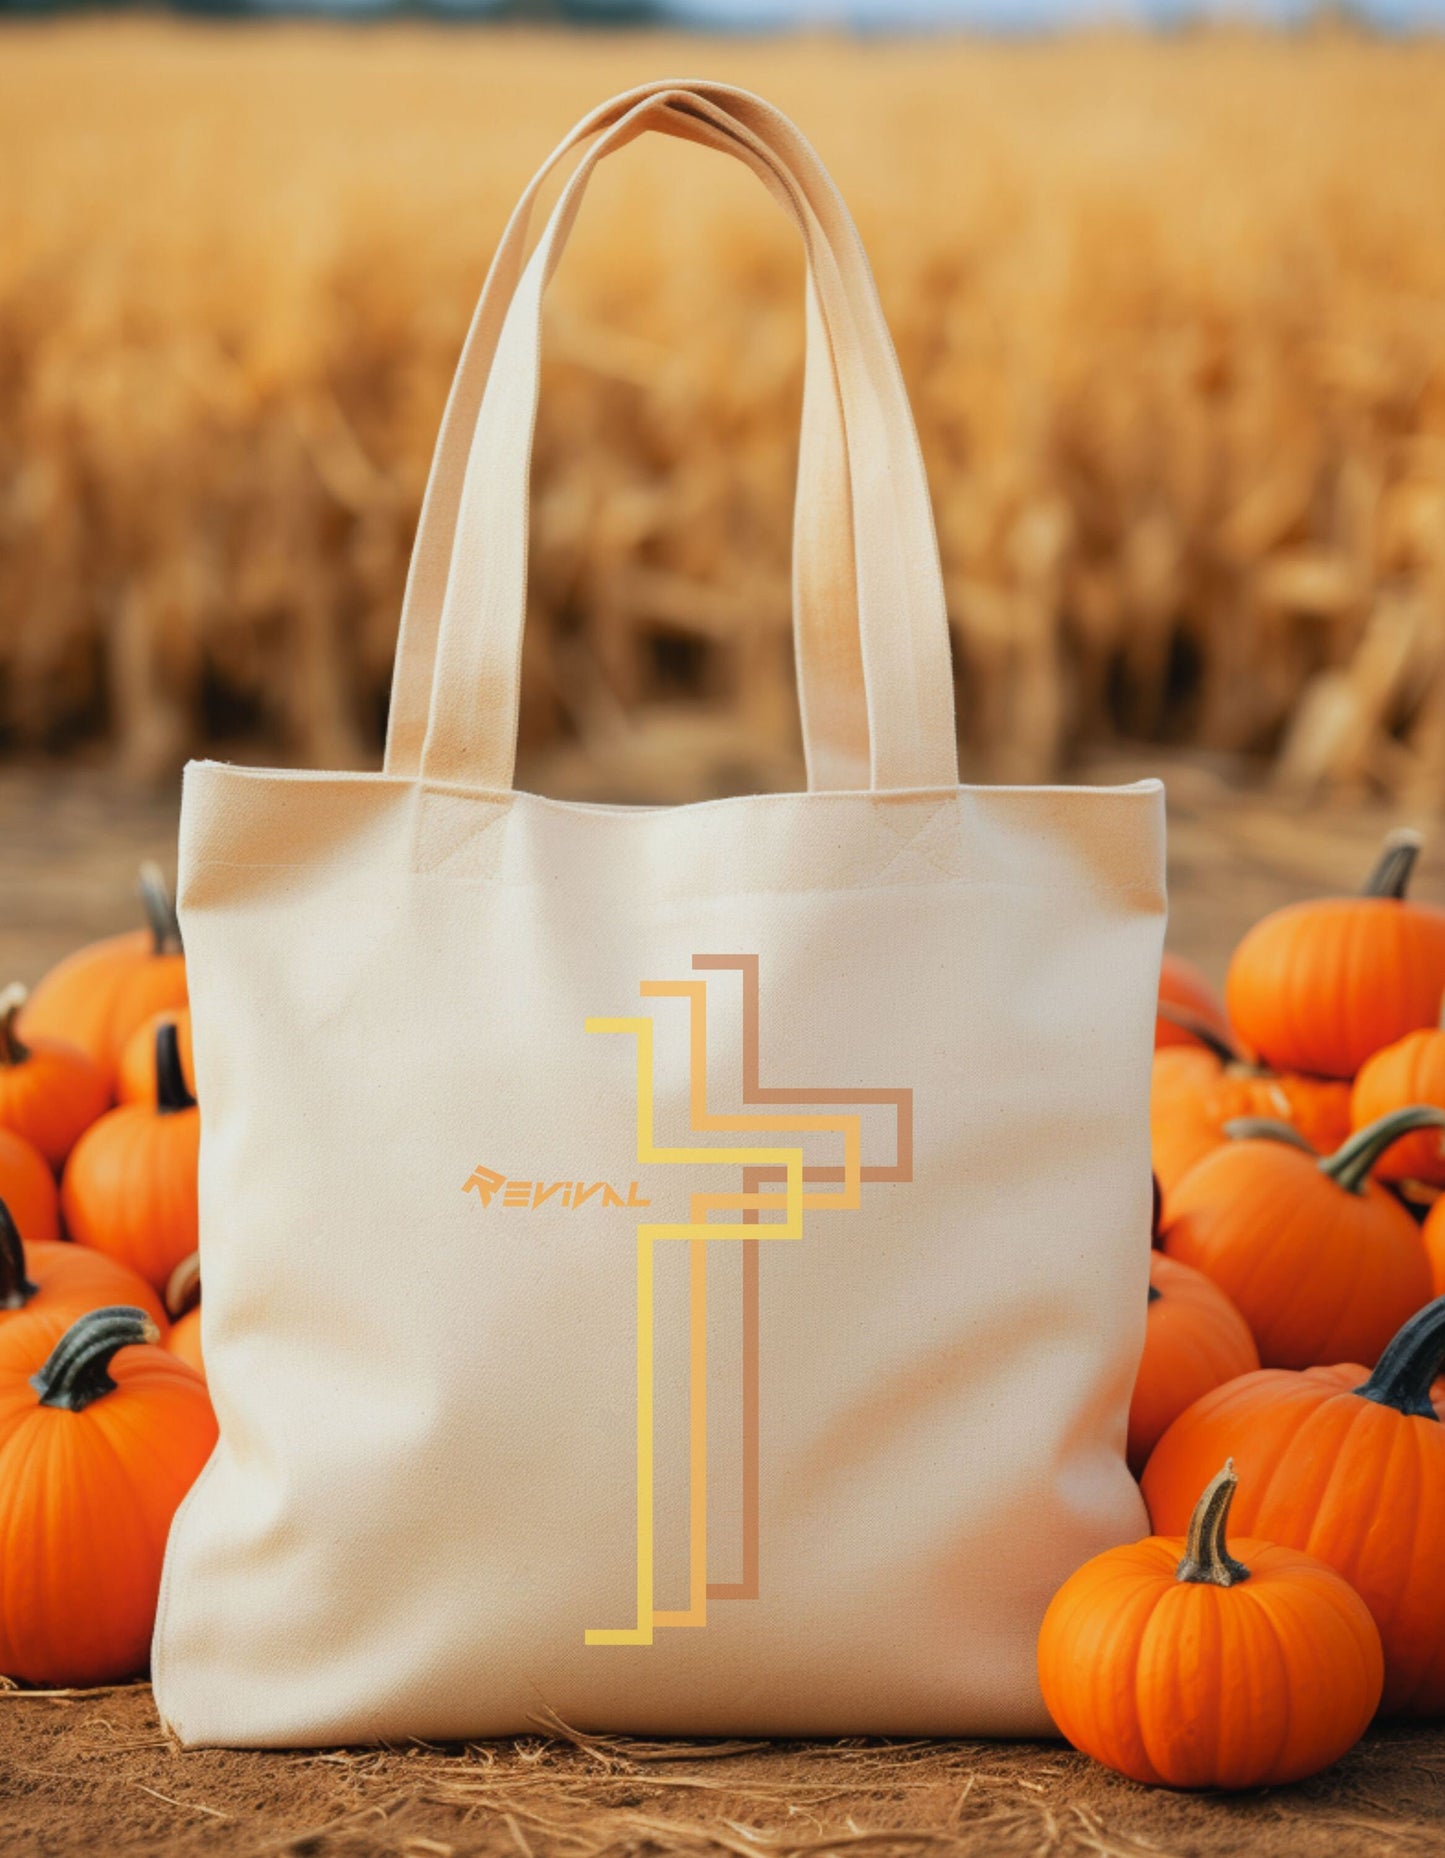 Pumpkin Spice Deluxe by Revival Cotton Canvas Tote Bag, Purse, Luggage, Grocery bag